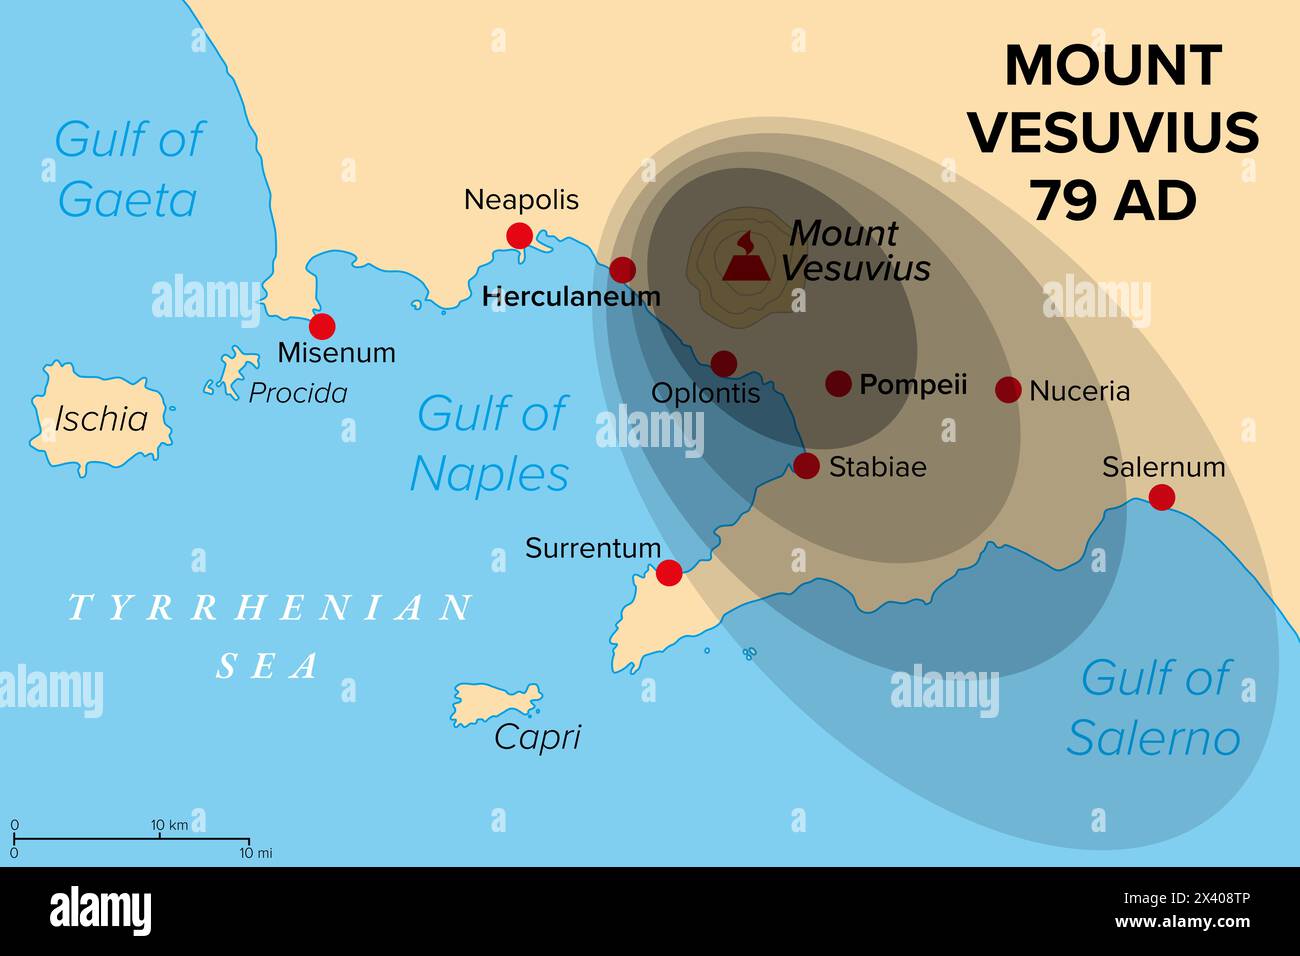 Eruption of Mount Vesuvius in 79 AD, history map. General distribution of ash and pumice. Stratovolcano in Italy, destroyed Pompeii and Herculaneum. Stock Photo